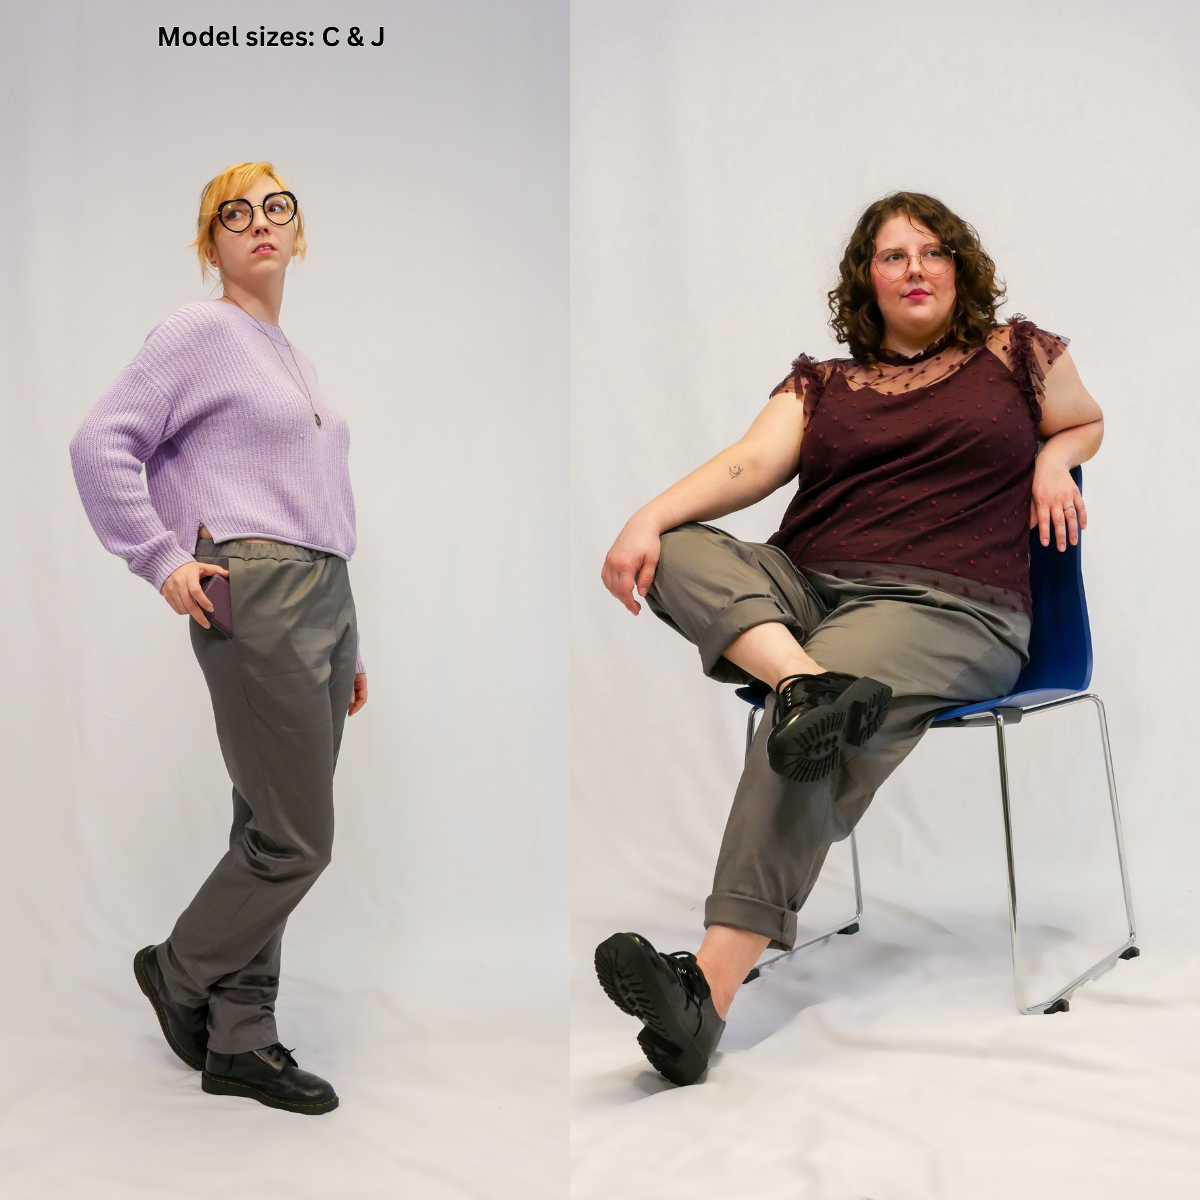 A split-screen image of a nonbinary model wearing completed FSCO Pants (f) in size C and a female model wearing completed FSCO Pants (f) in size J. The size C model's pants are paired with a lilac sweater.  They are holding a cell phone in the pocket of their pants to demonstrate the depth of the pocket. The size J model's pants are paired with a deep purple business casual blouse. She is sitting on a chair with her leg crossed over the other.